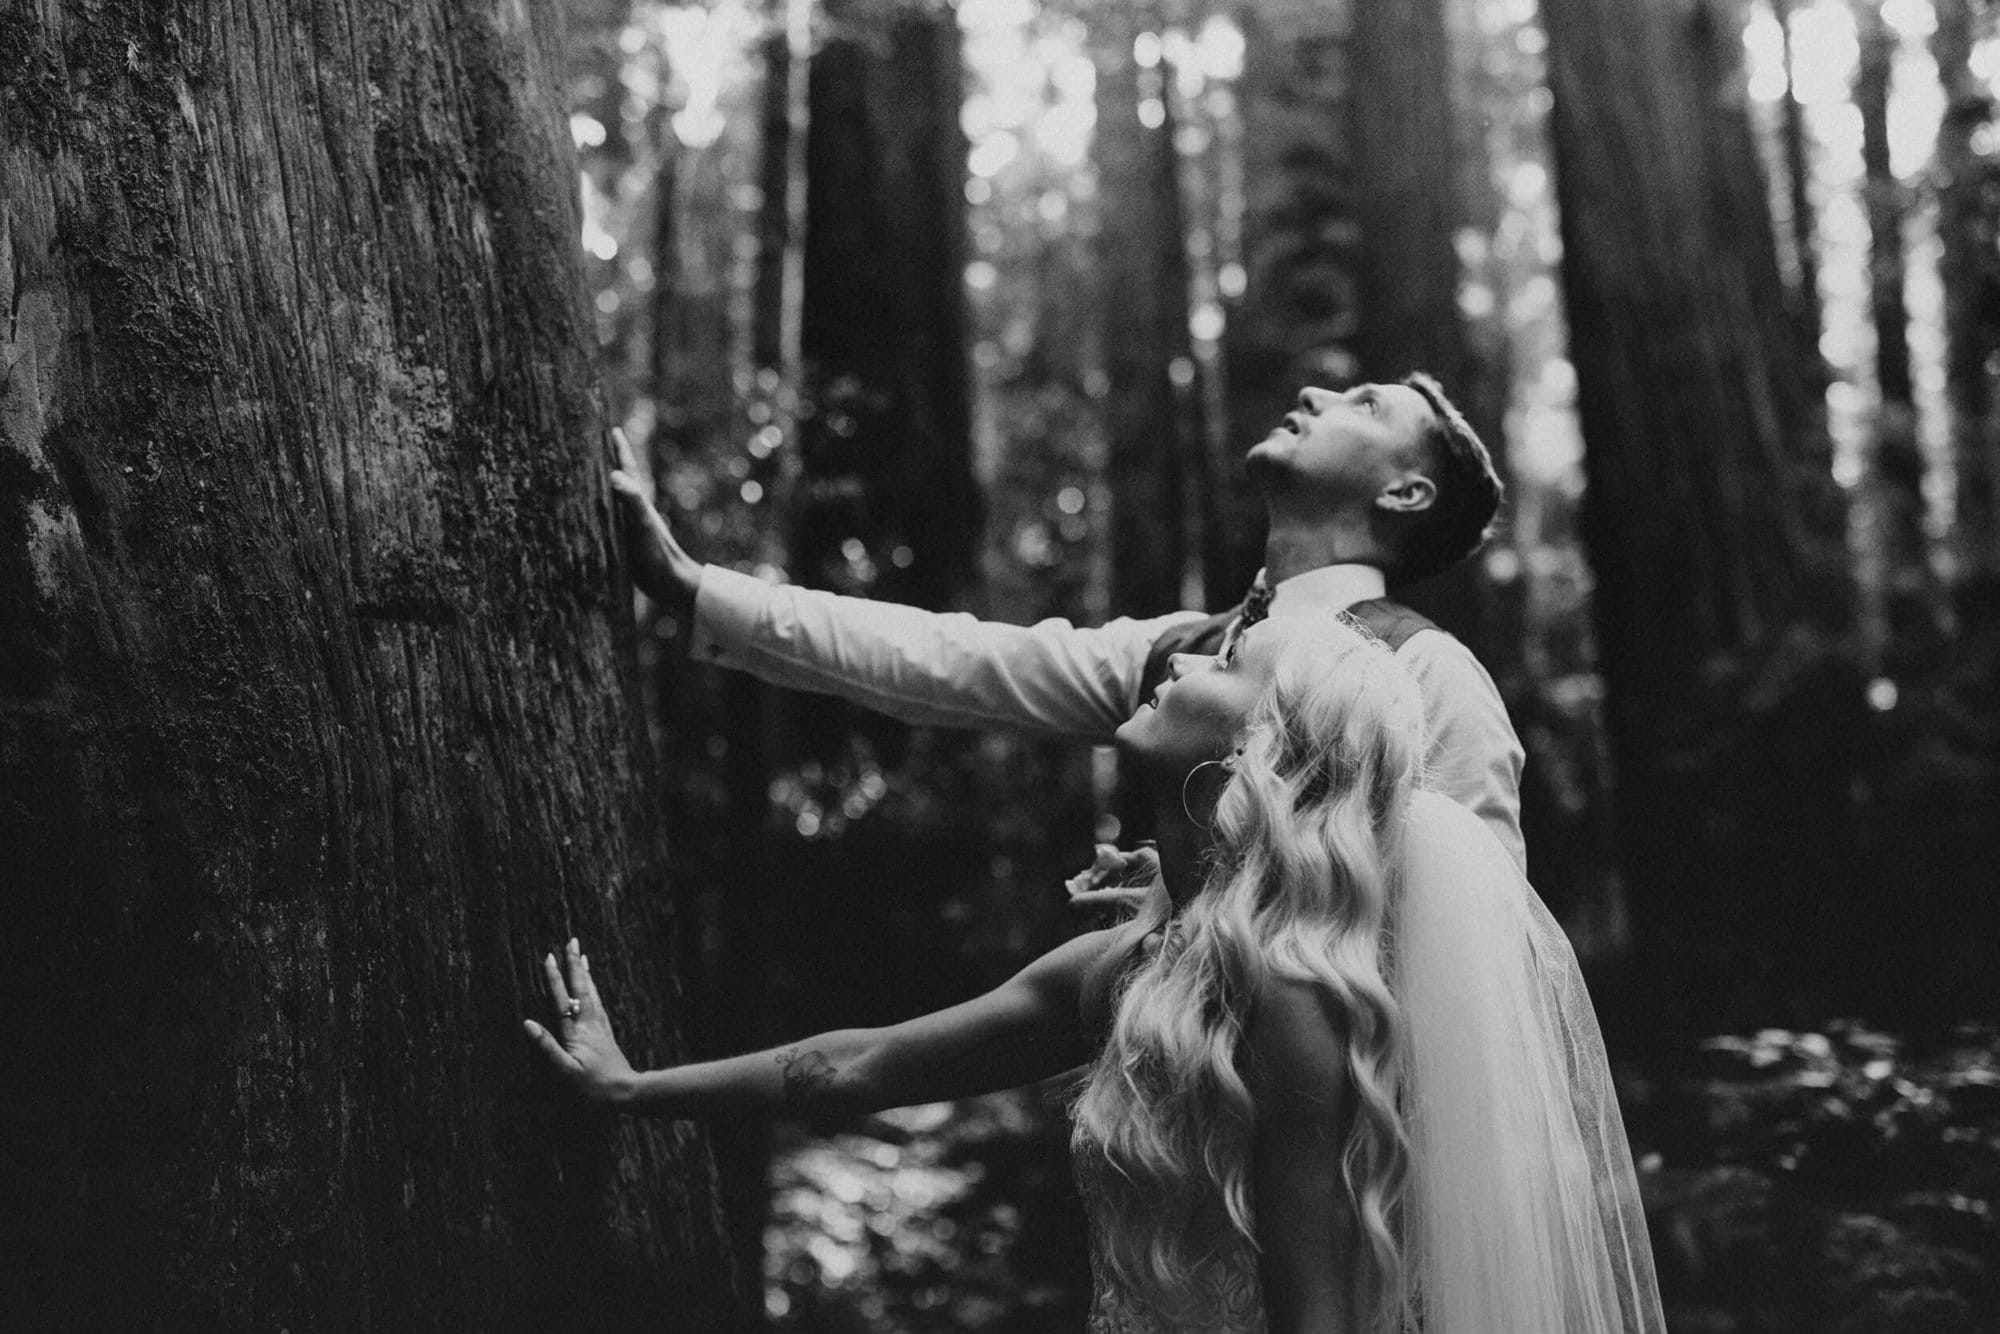 This couple had the most magical and emotional intimate wedding in the Redwoods. You have to see all the joy and beauty yourself.